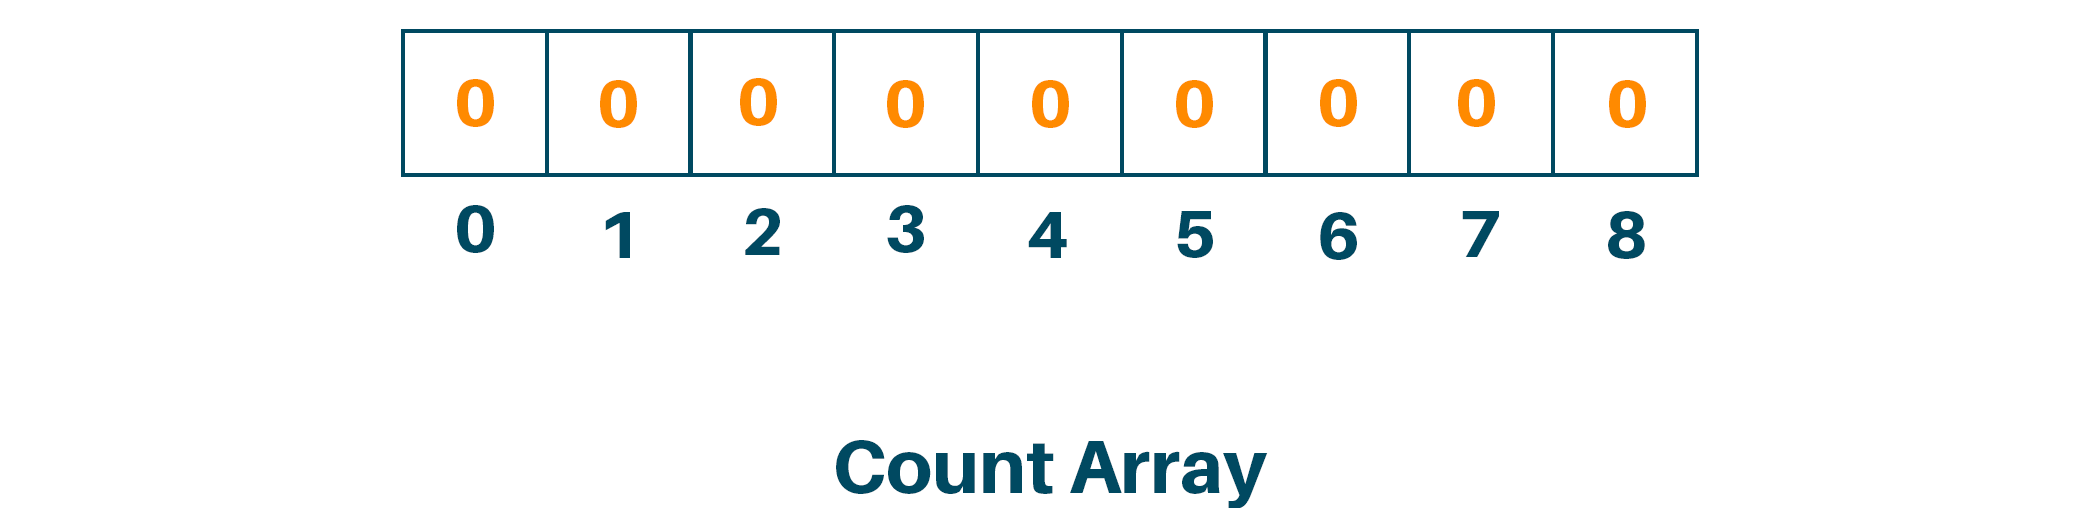 Count array initialization